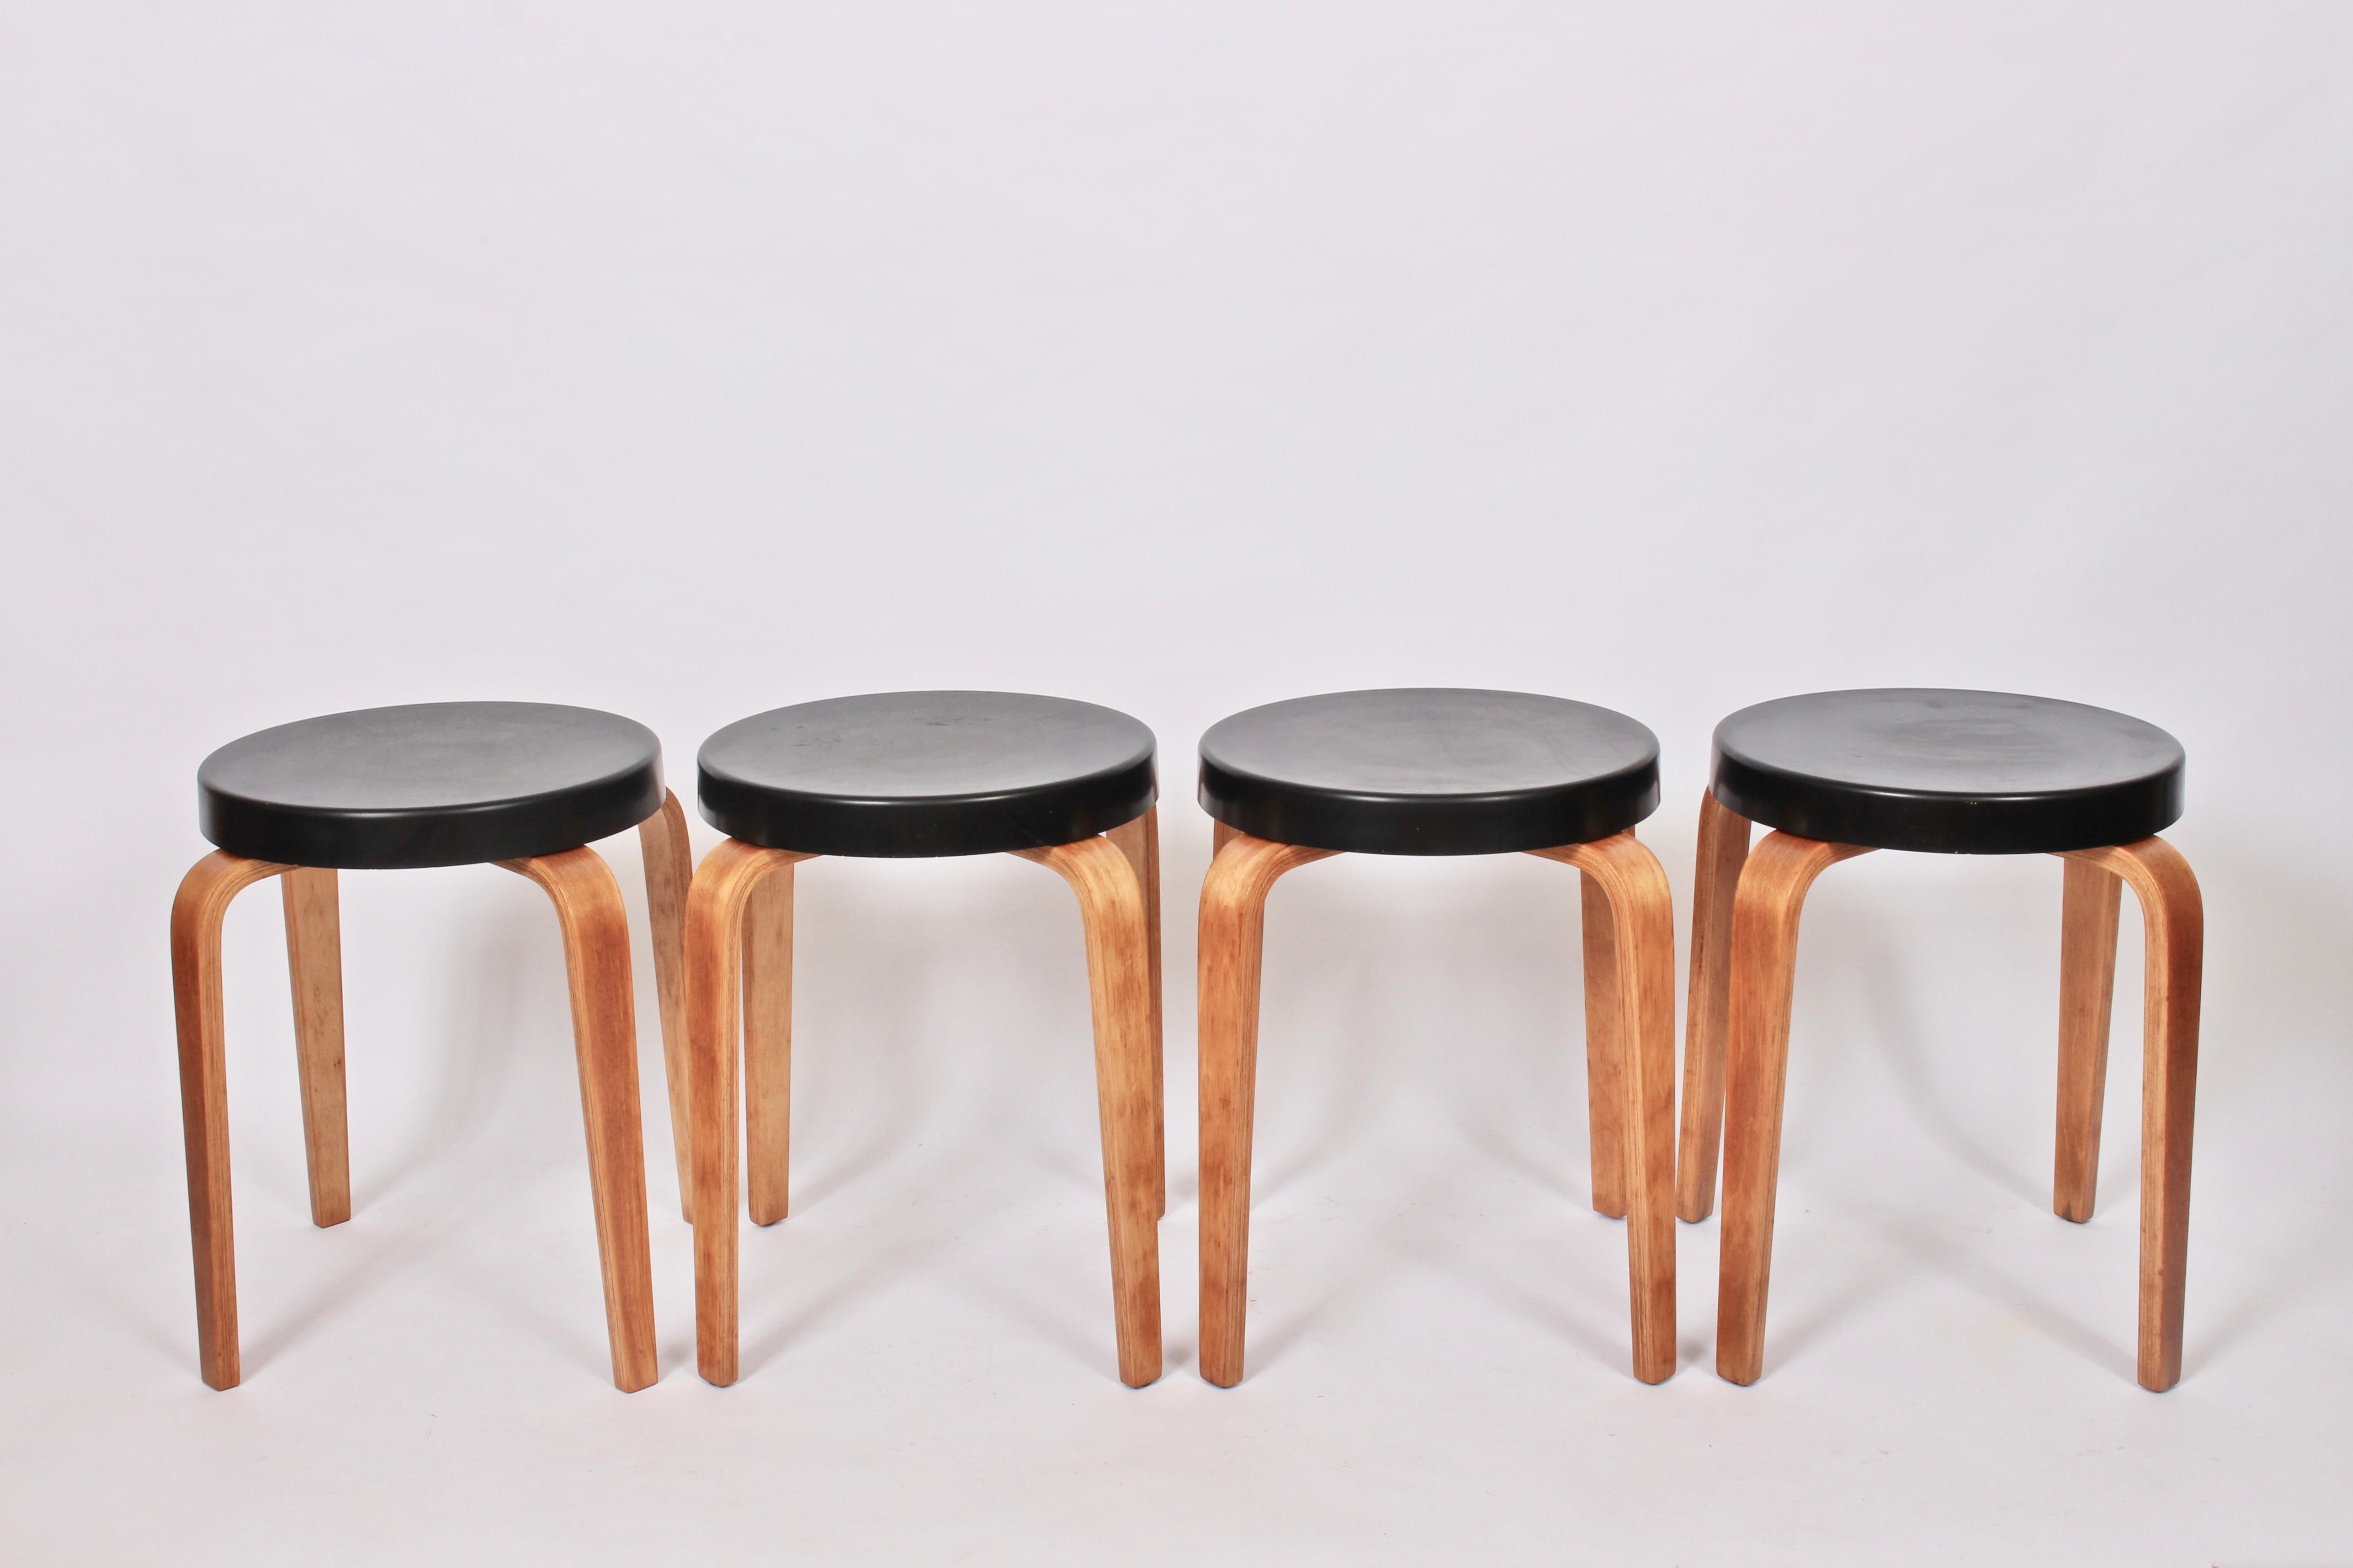 Art Deco set of 4 molded black Bakelite and bentwood nesting tables. Classic. Versatile. Rarity. Stamped THONET to mold on underside.